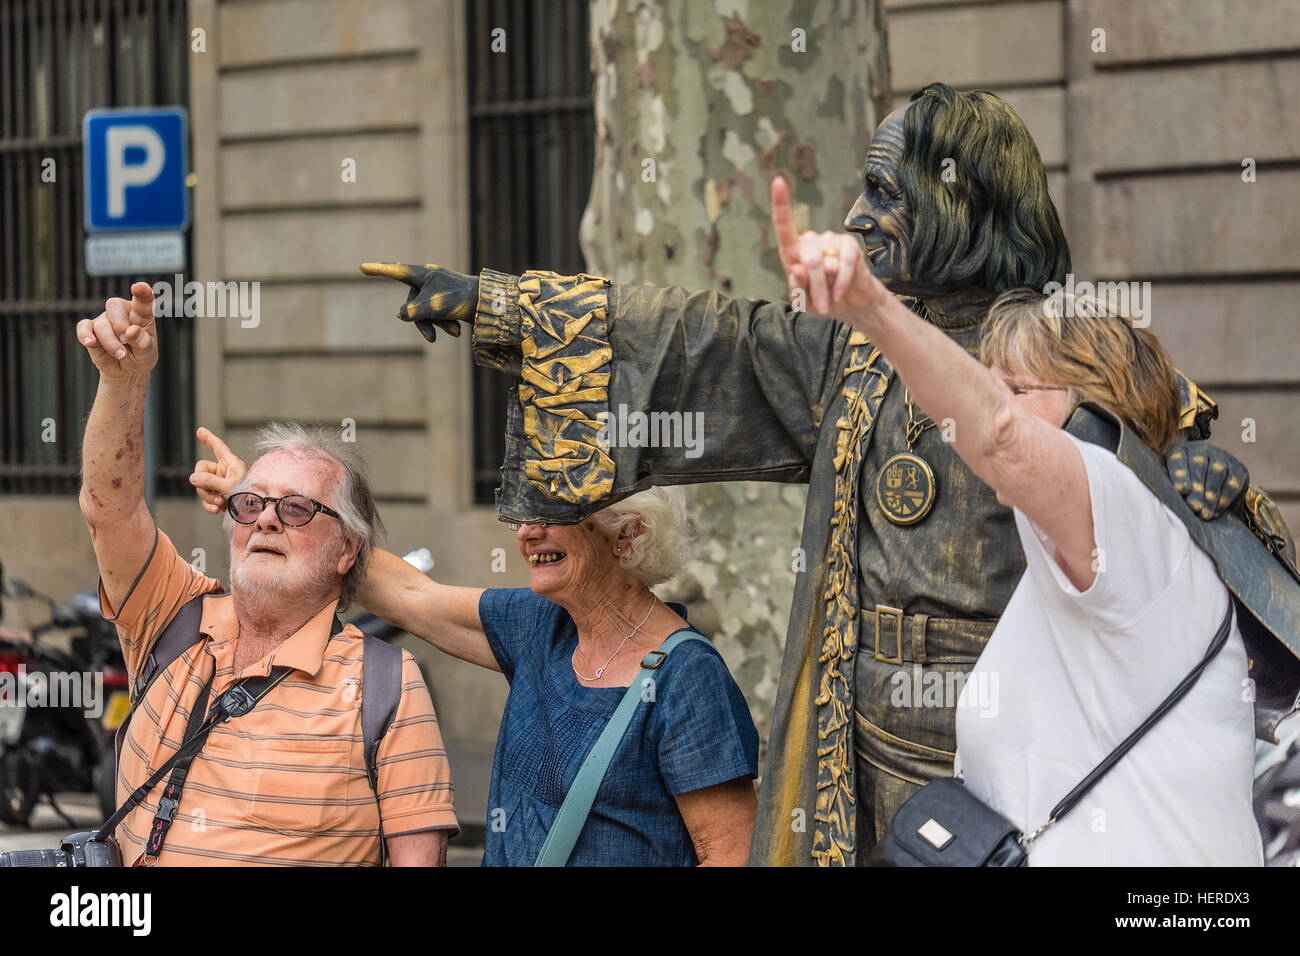 Three tourists having fun while pointing in the air with a street performer in on Las Ramblas, Barcelona, Spain. Stock Photo